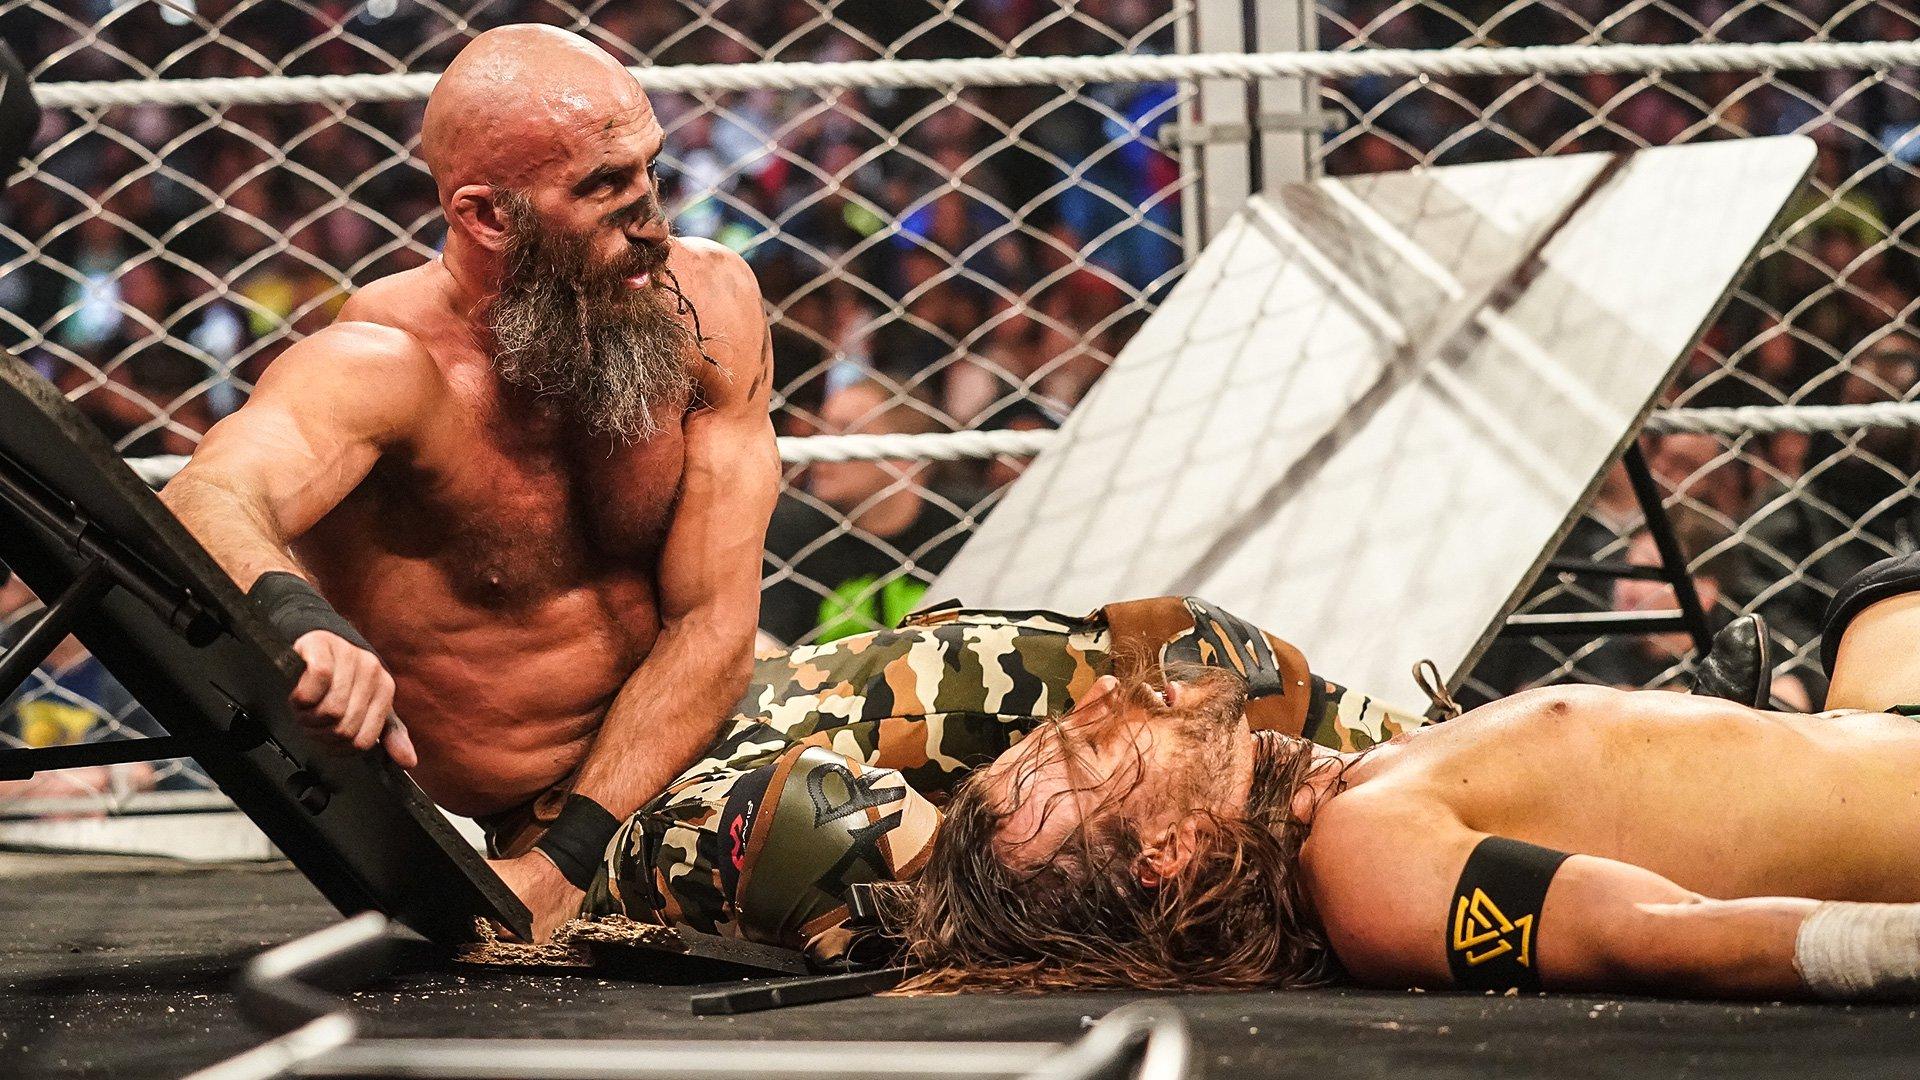 Image result for wwe nxt takeover wargames 2019 gif"